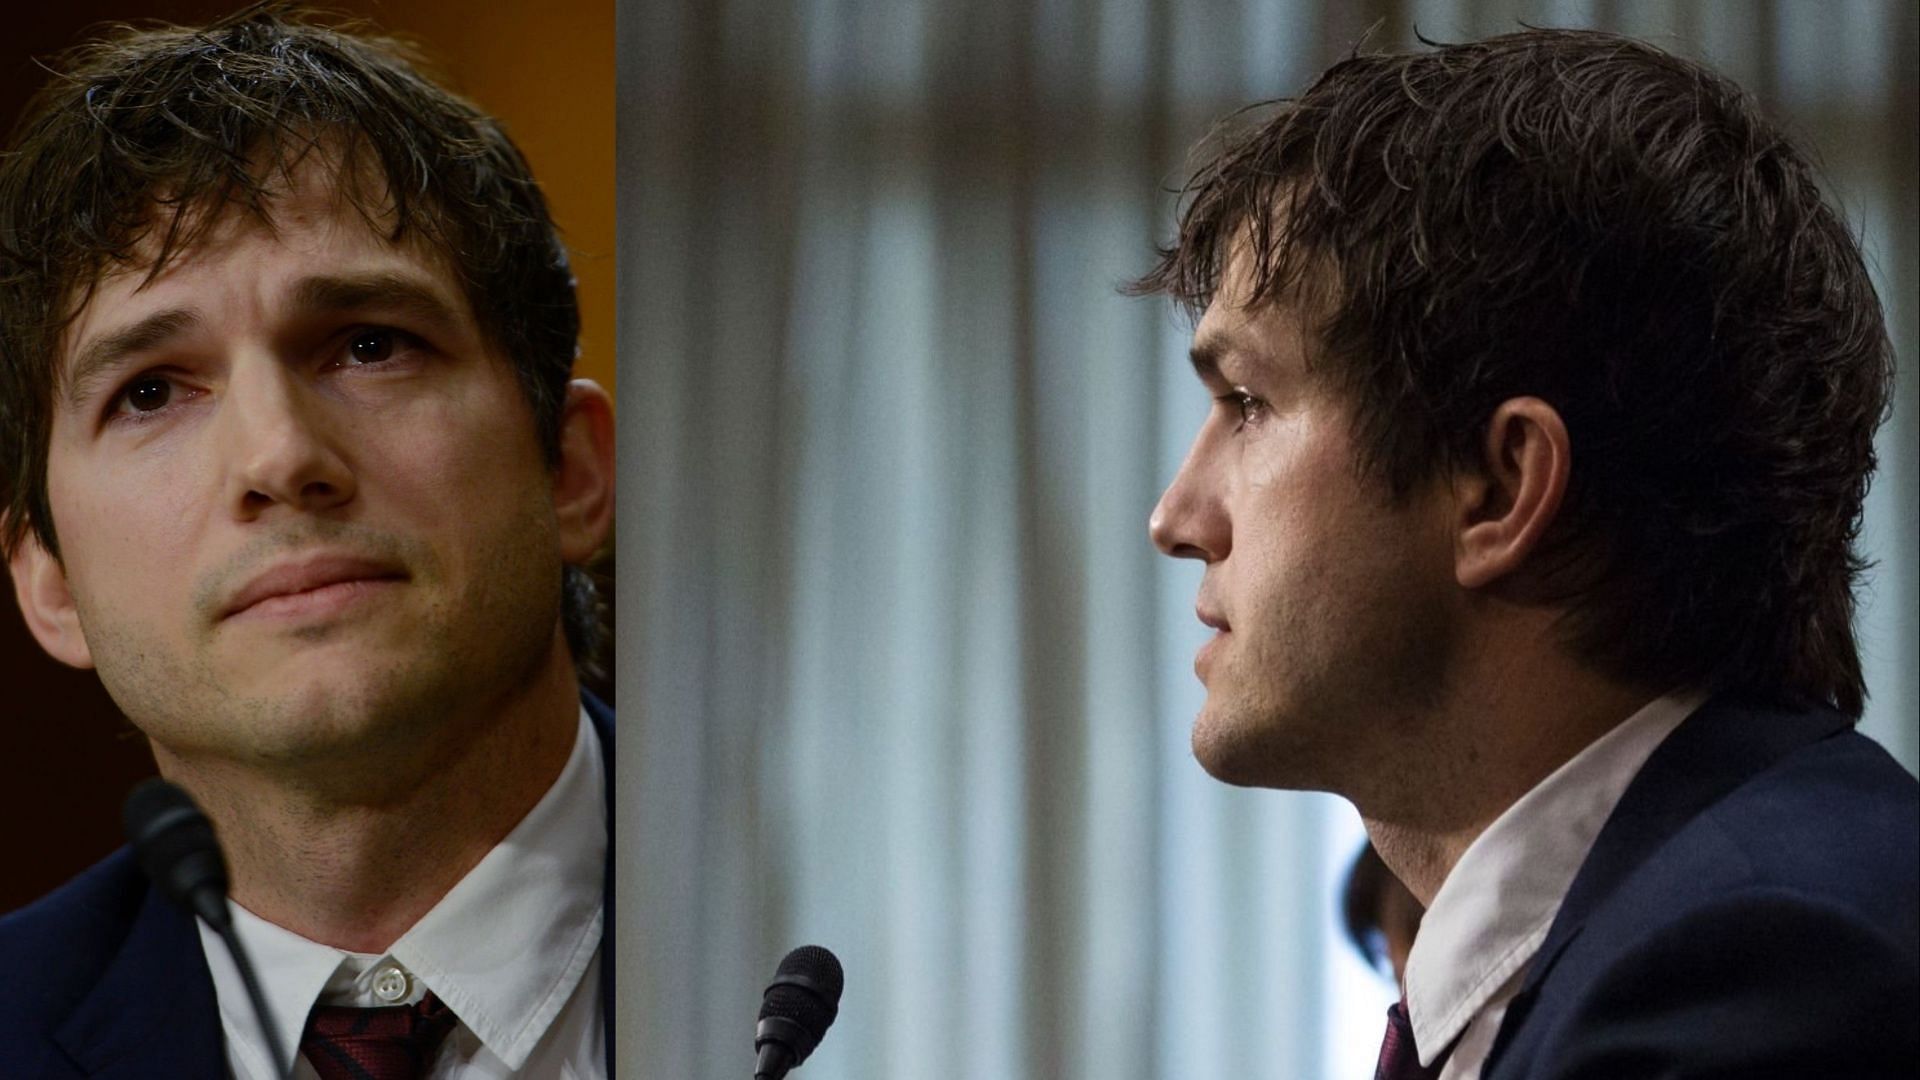 Ashton Kutcher giving an emotional speech about child trafficking before the US Senate. (Images via Leigh Vogel/Getty Images)